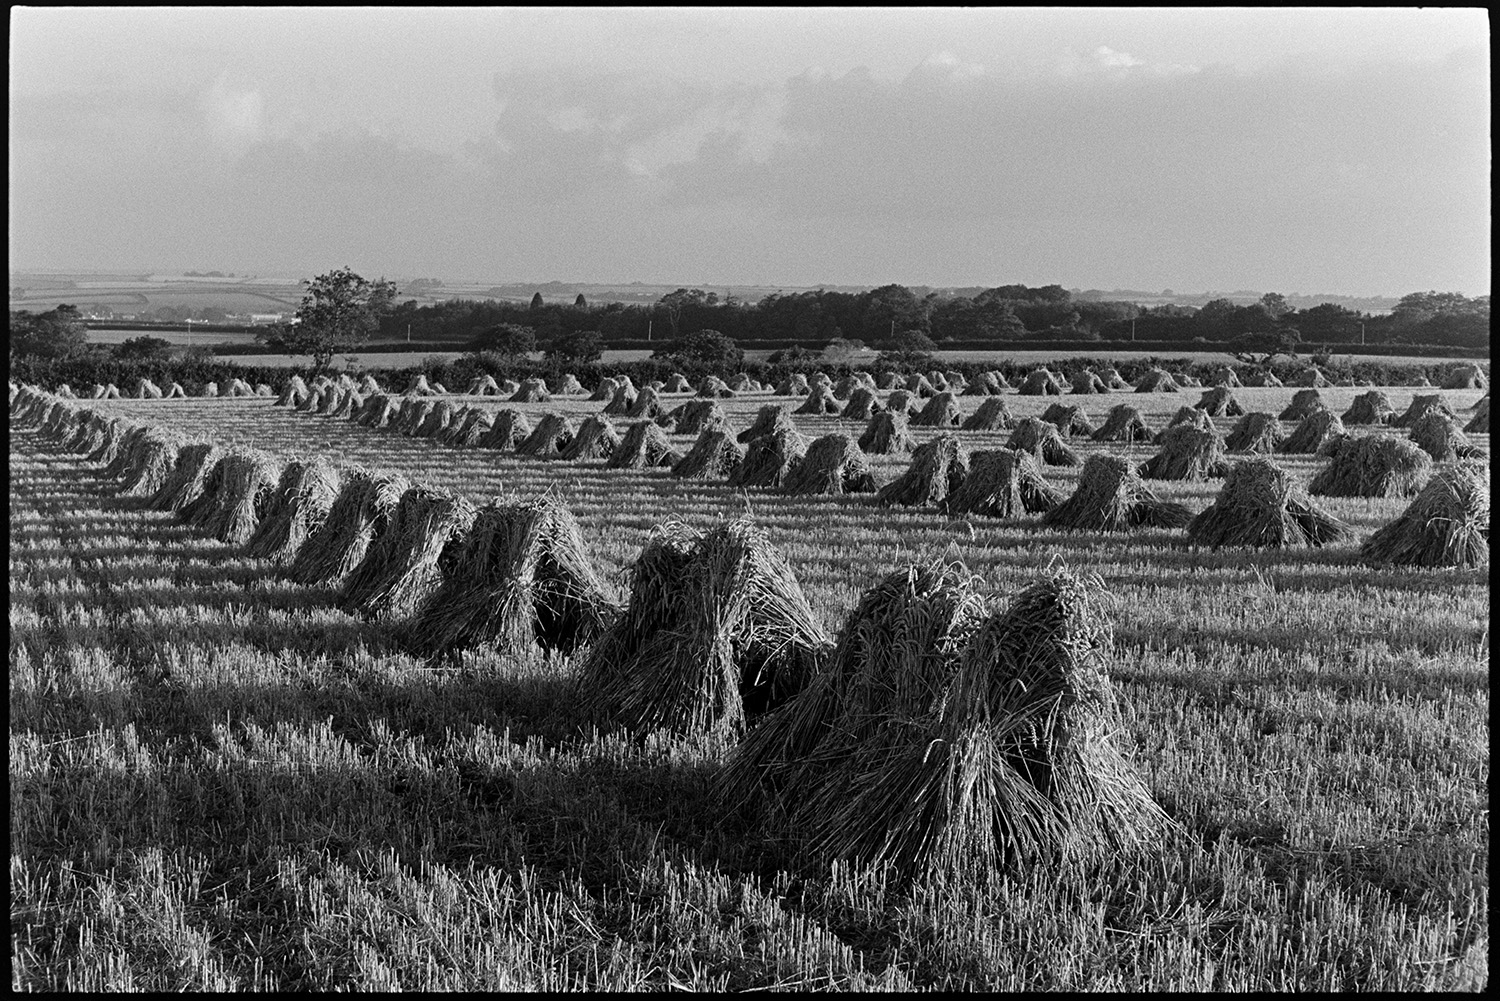 Corn stooks, sunlit evening.
[Rows of stooks in a cornfield, on a sunlit evening at Windwhistle, Upcott, near Dolton. Trees and field can be seen in the background.]